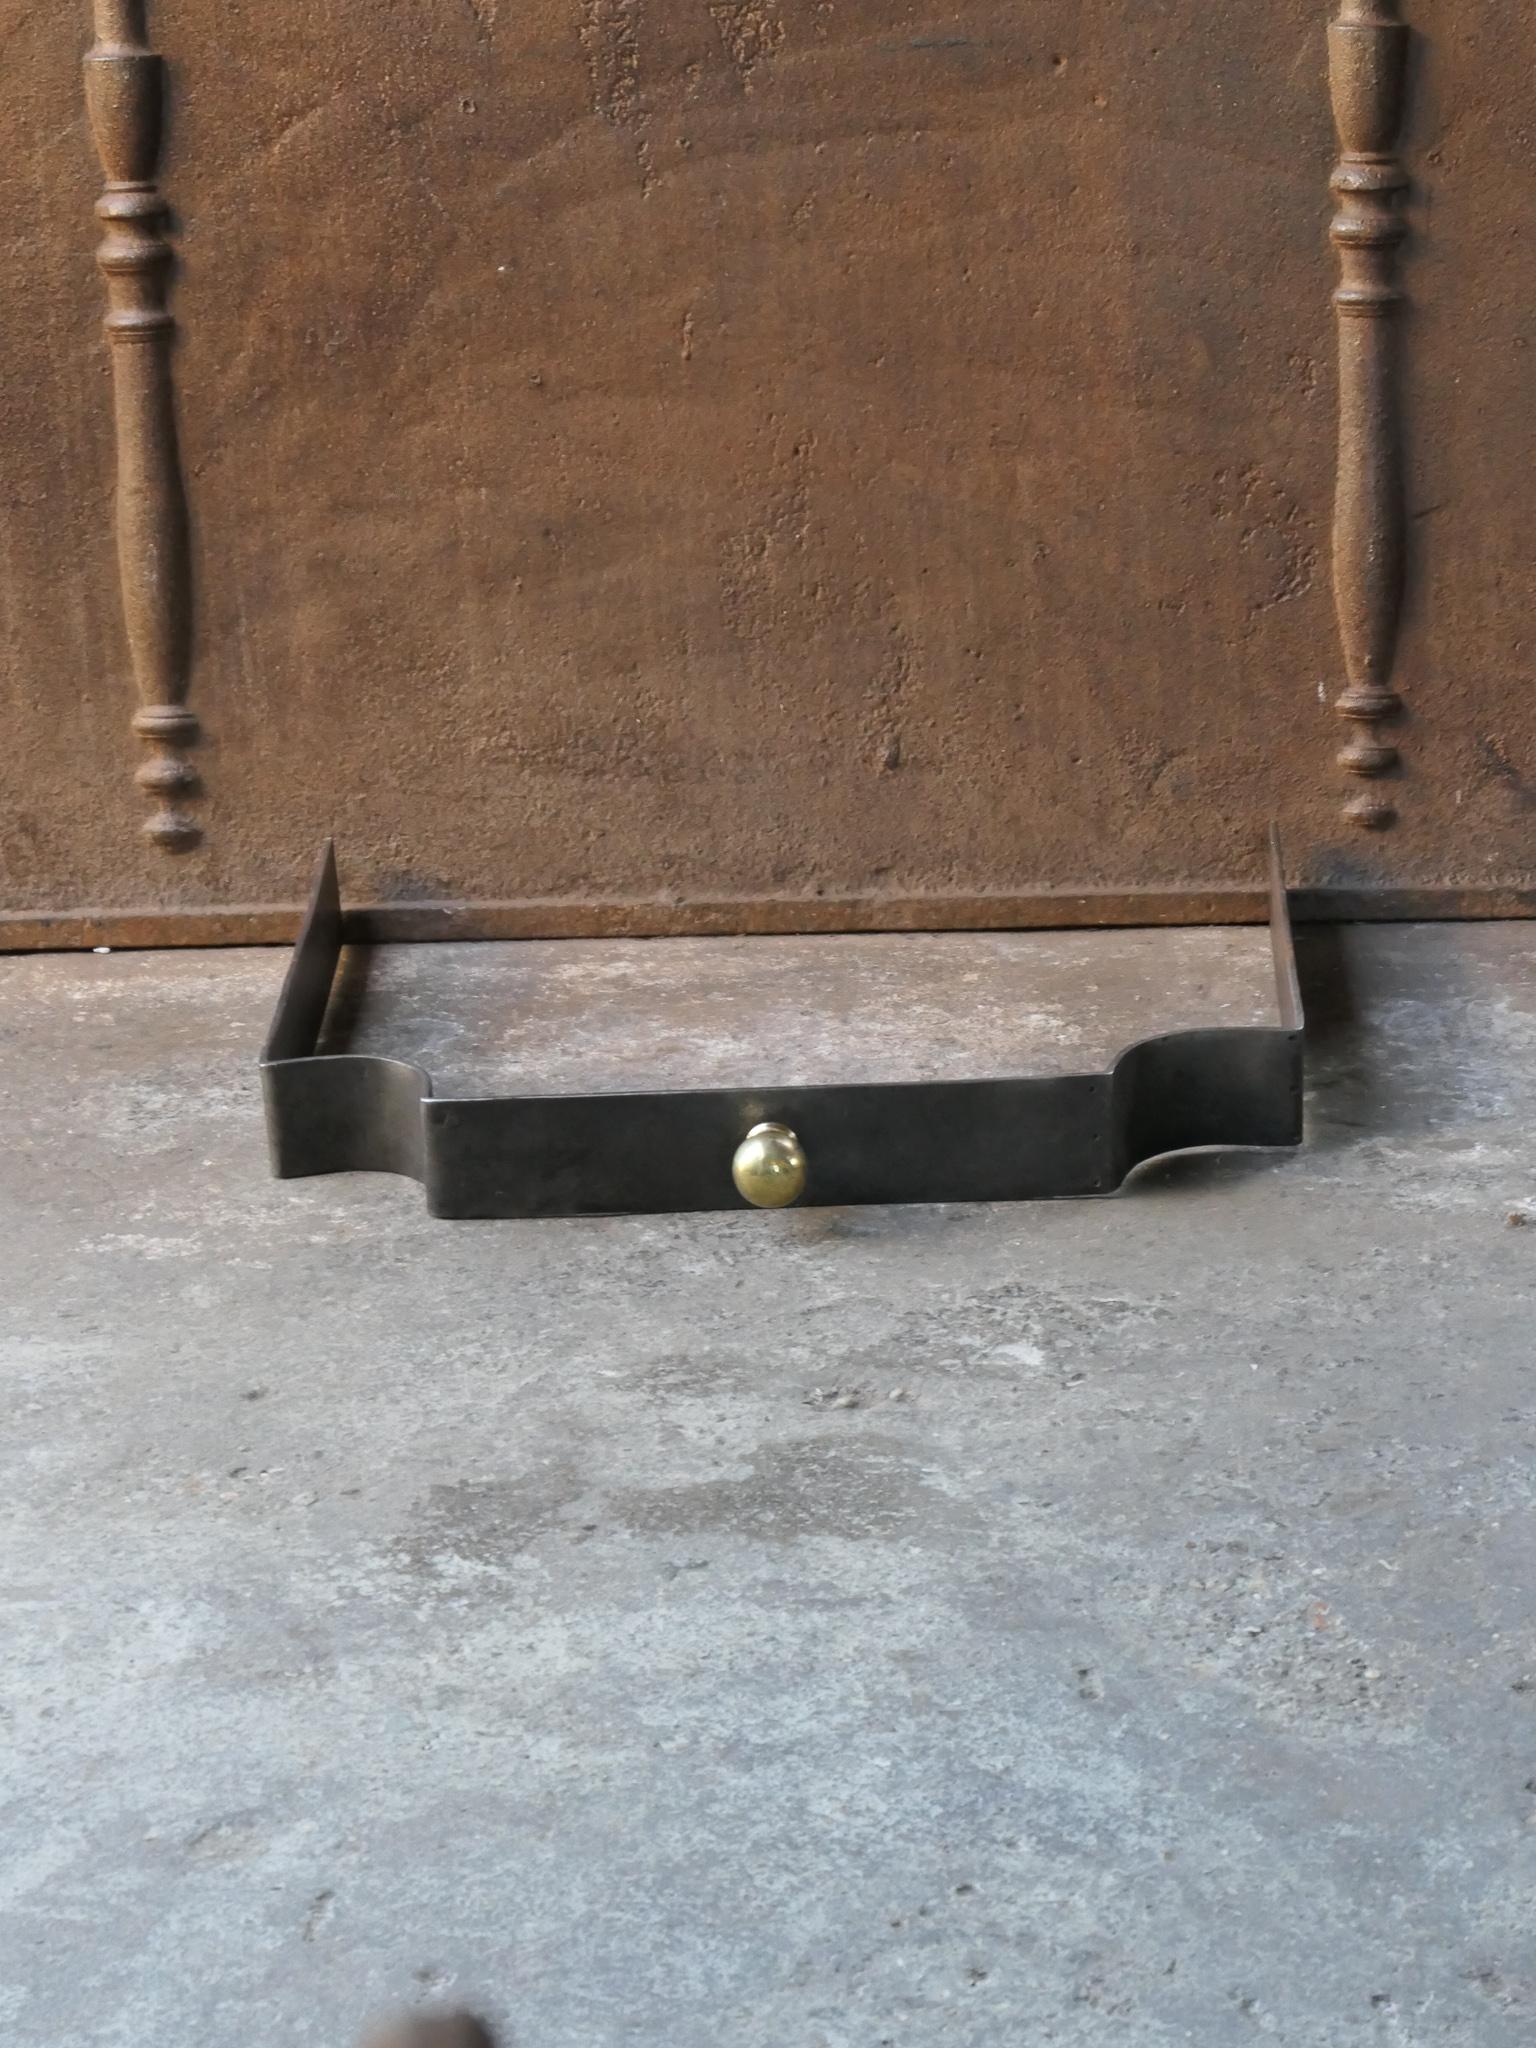 19th Century French Napoleon III fire fender made of brass and wrought iron. The condition is good.







